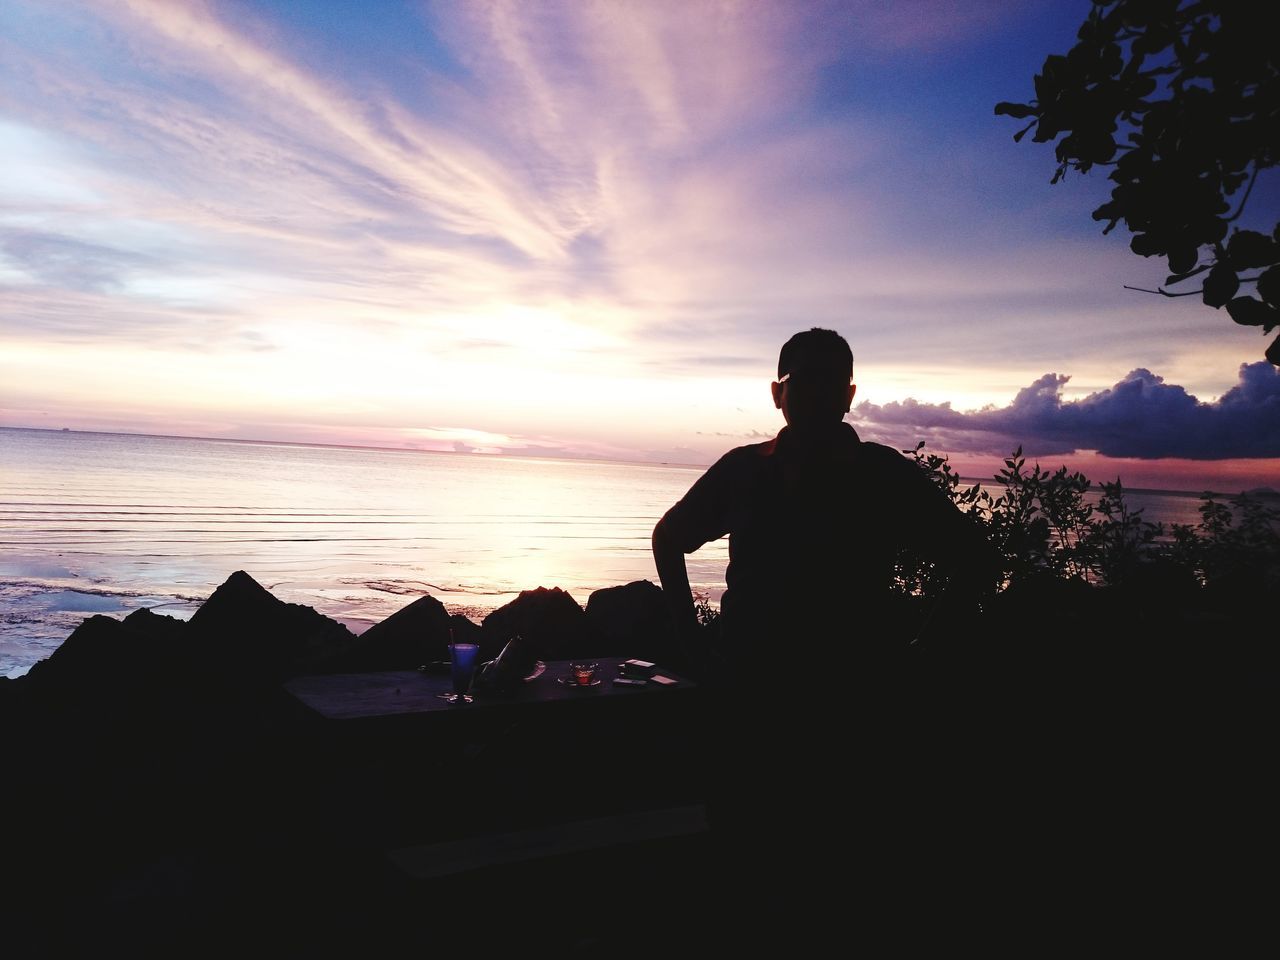 sky, silhouette, sunset, sea, water, one person, nature, cloud, horizon, beach, beauty in nature, land, men, adult, dusk, scenics - nature, leisure activity, relaxation, evening, lifestyles, tranquility, sitting, sunlight, tranquil scene, outdoors, vacation, trip, holiday, backlighting, idyllic